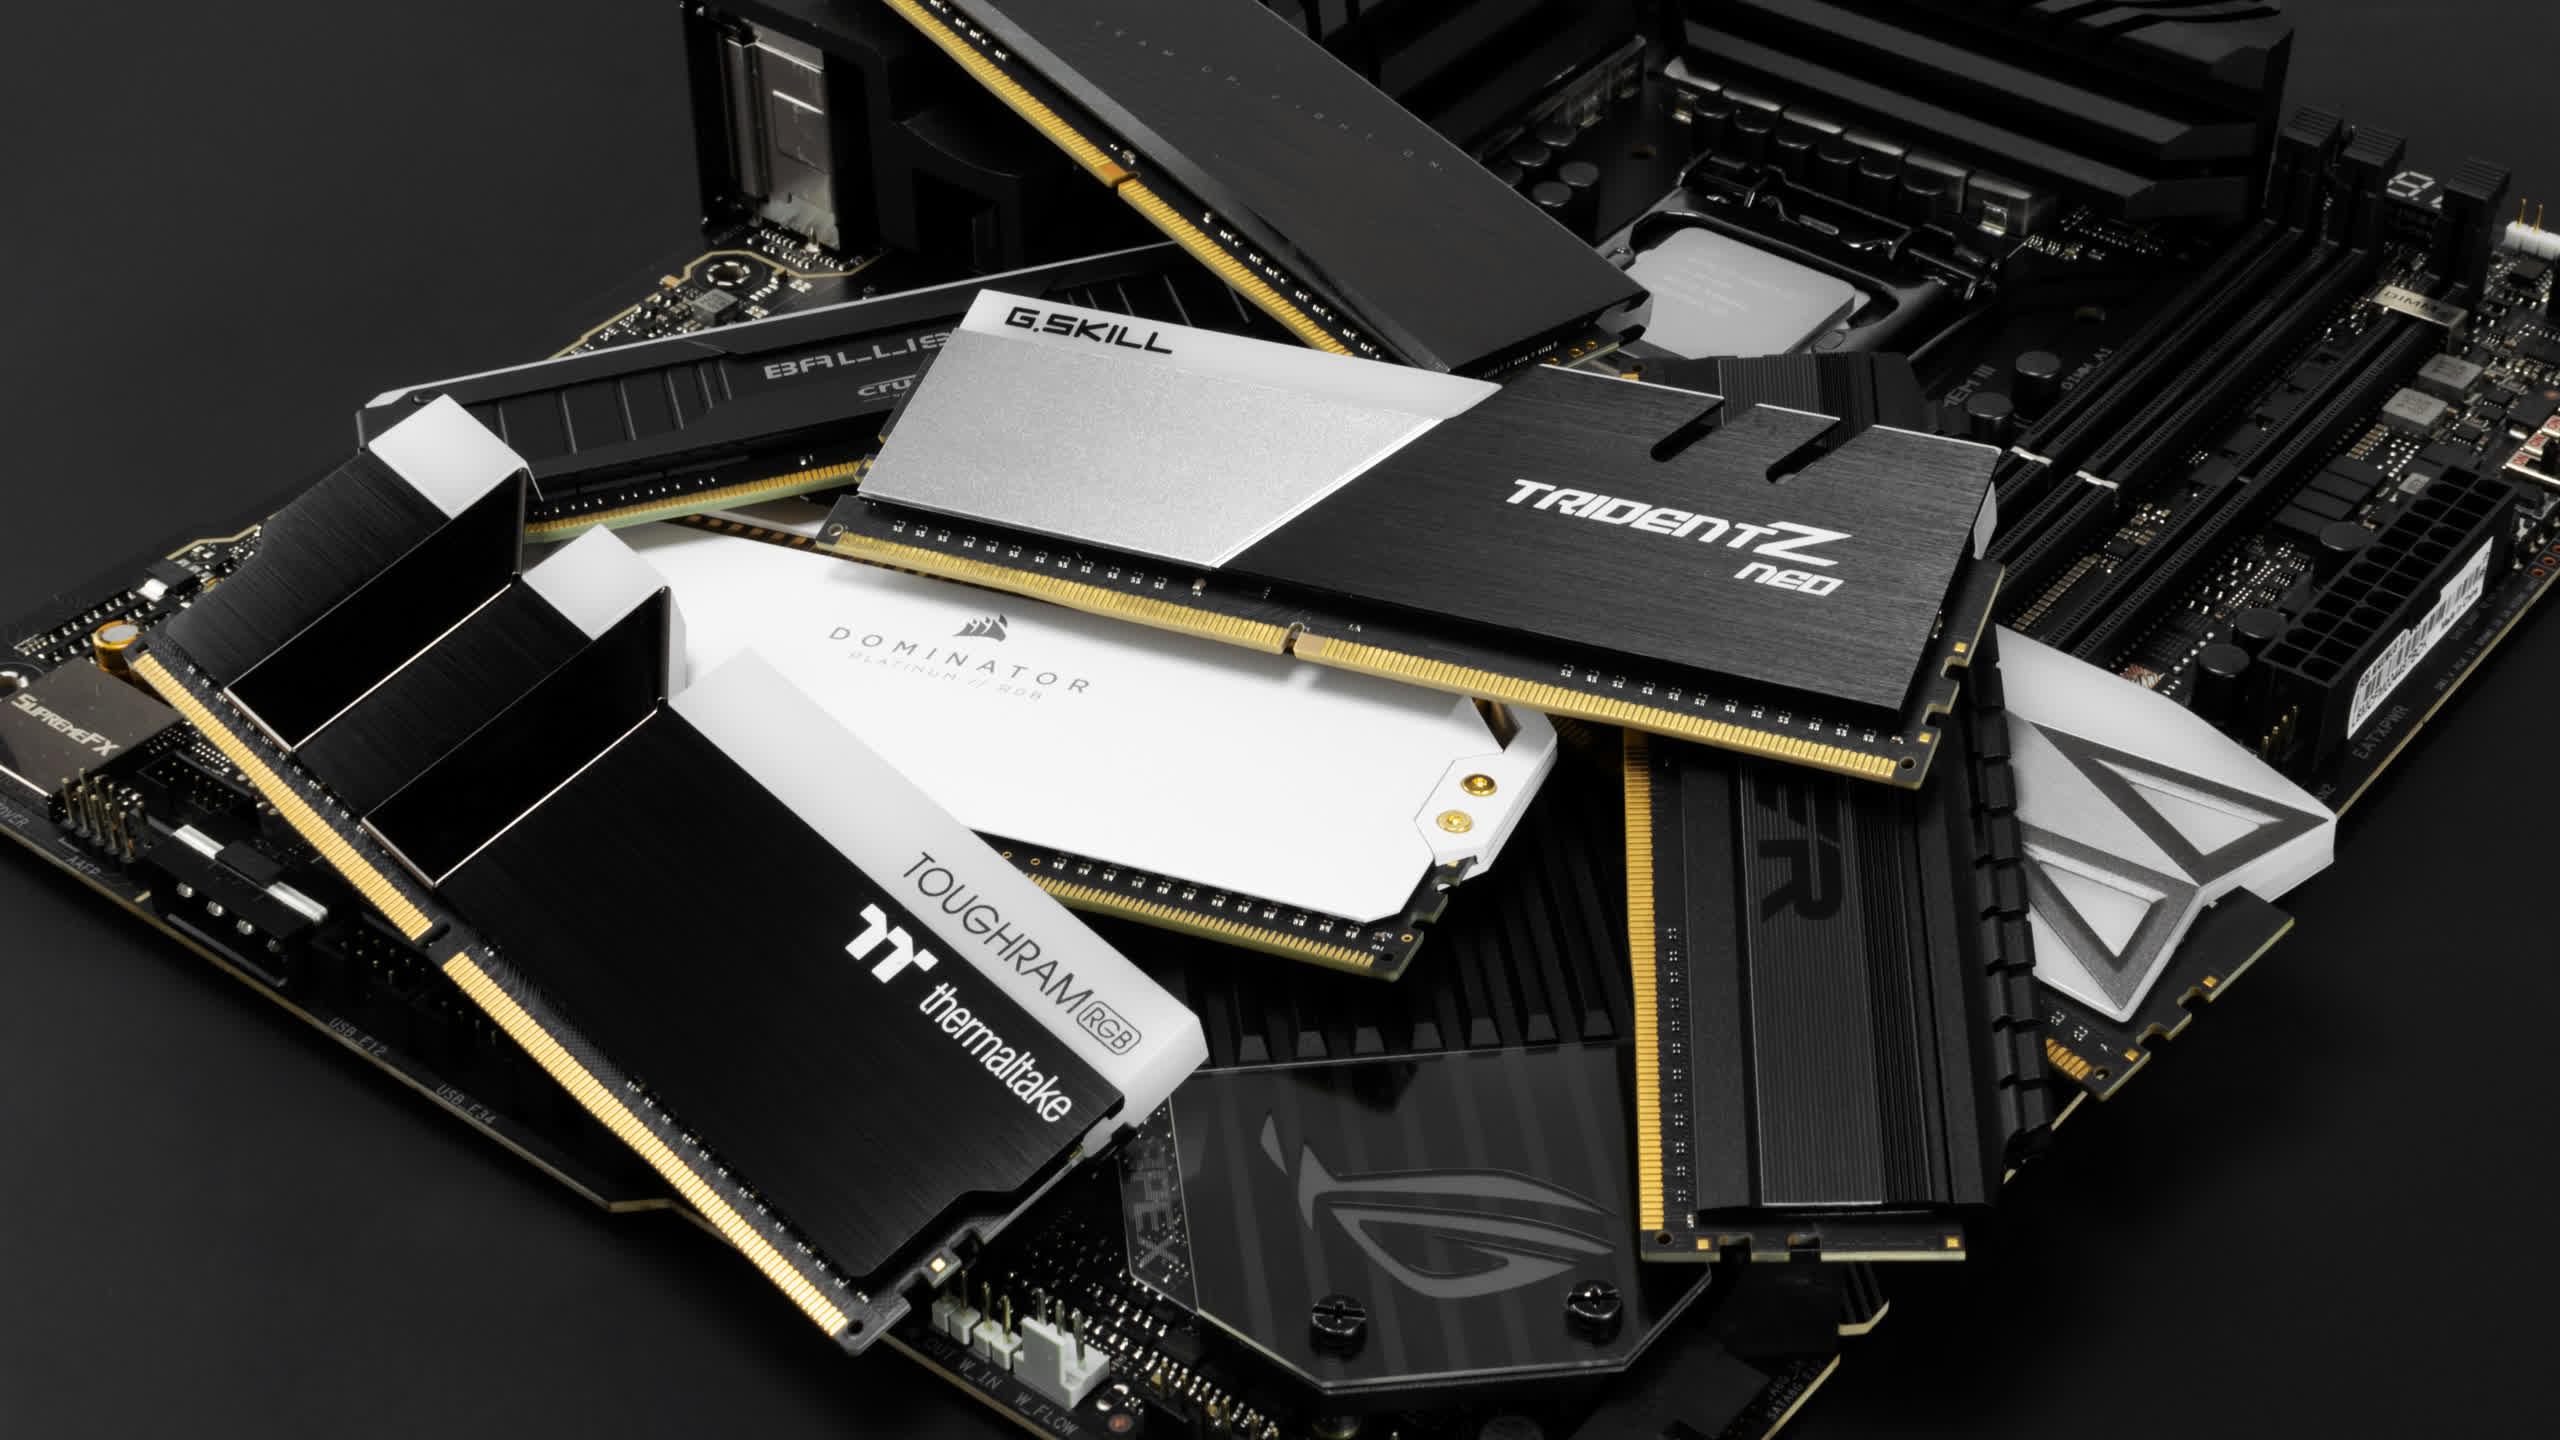 Samsung will cut DDR4 memory production to endure harsh market conditions